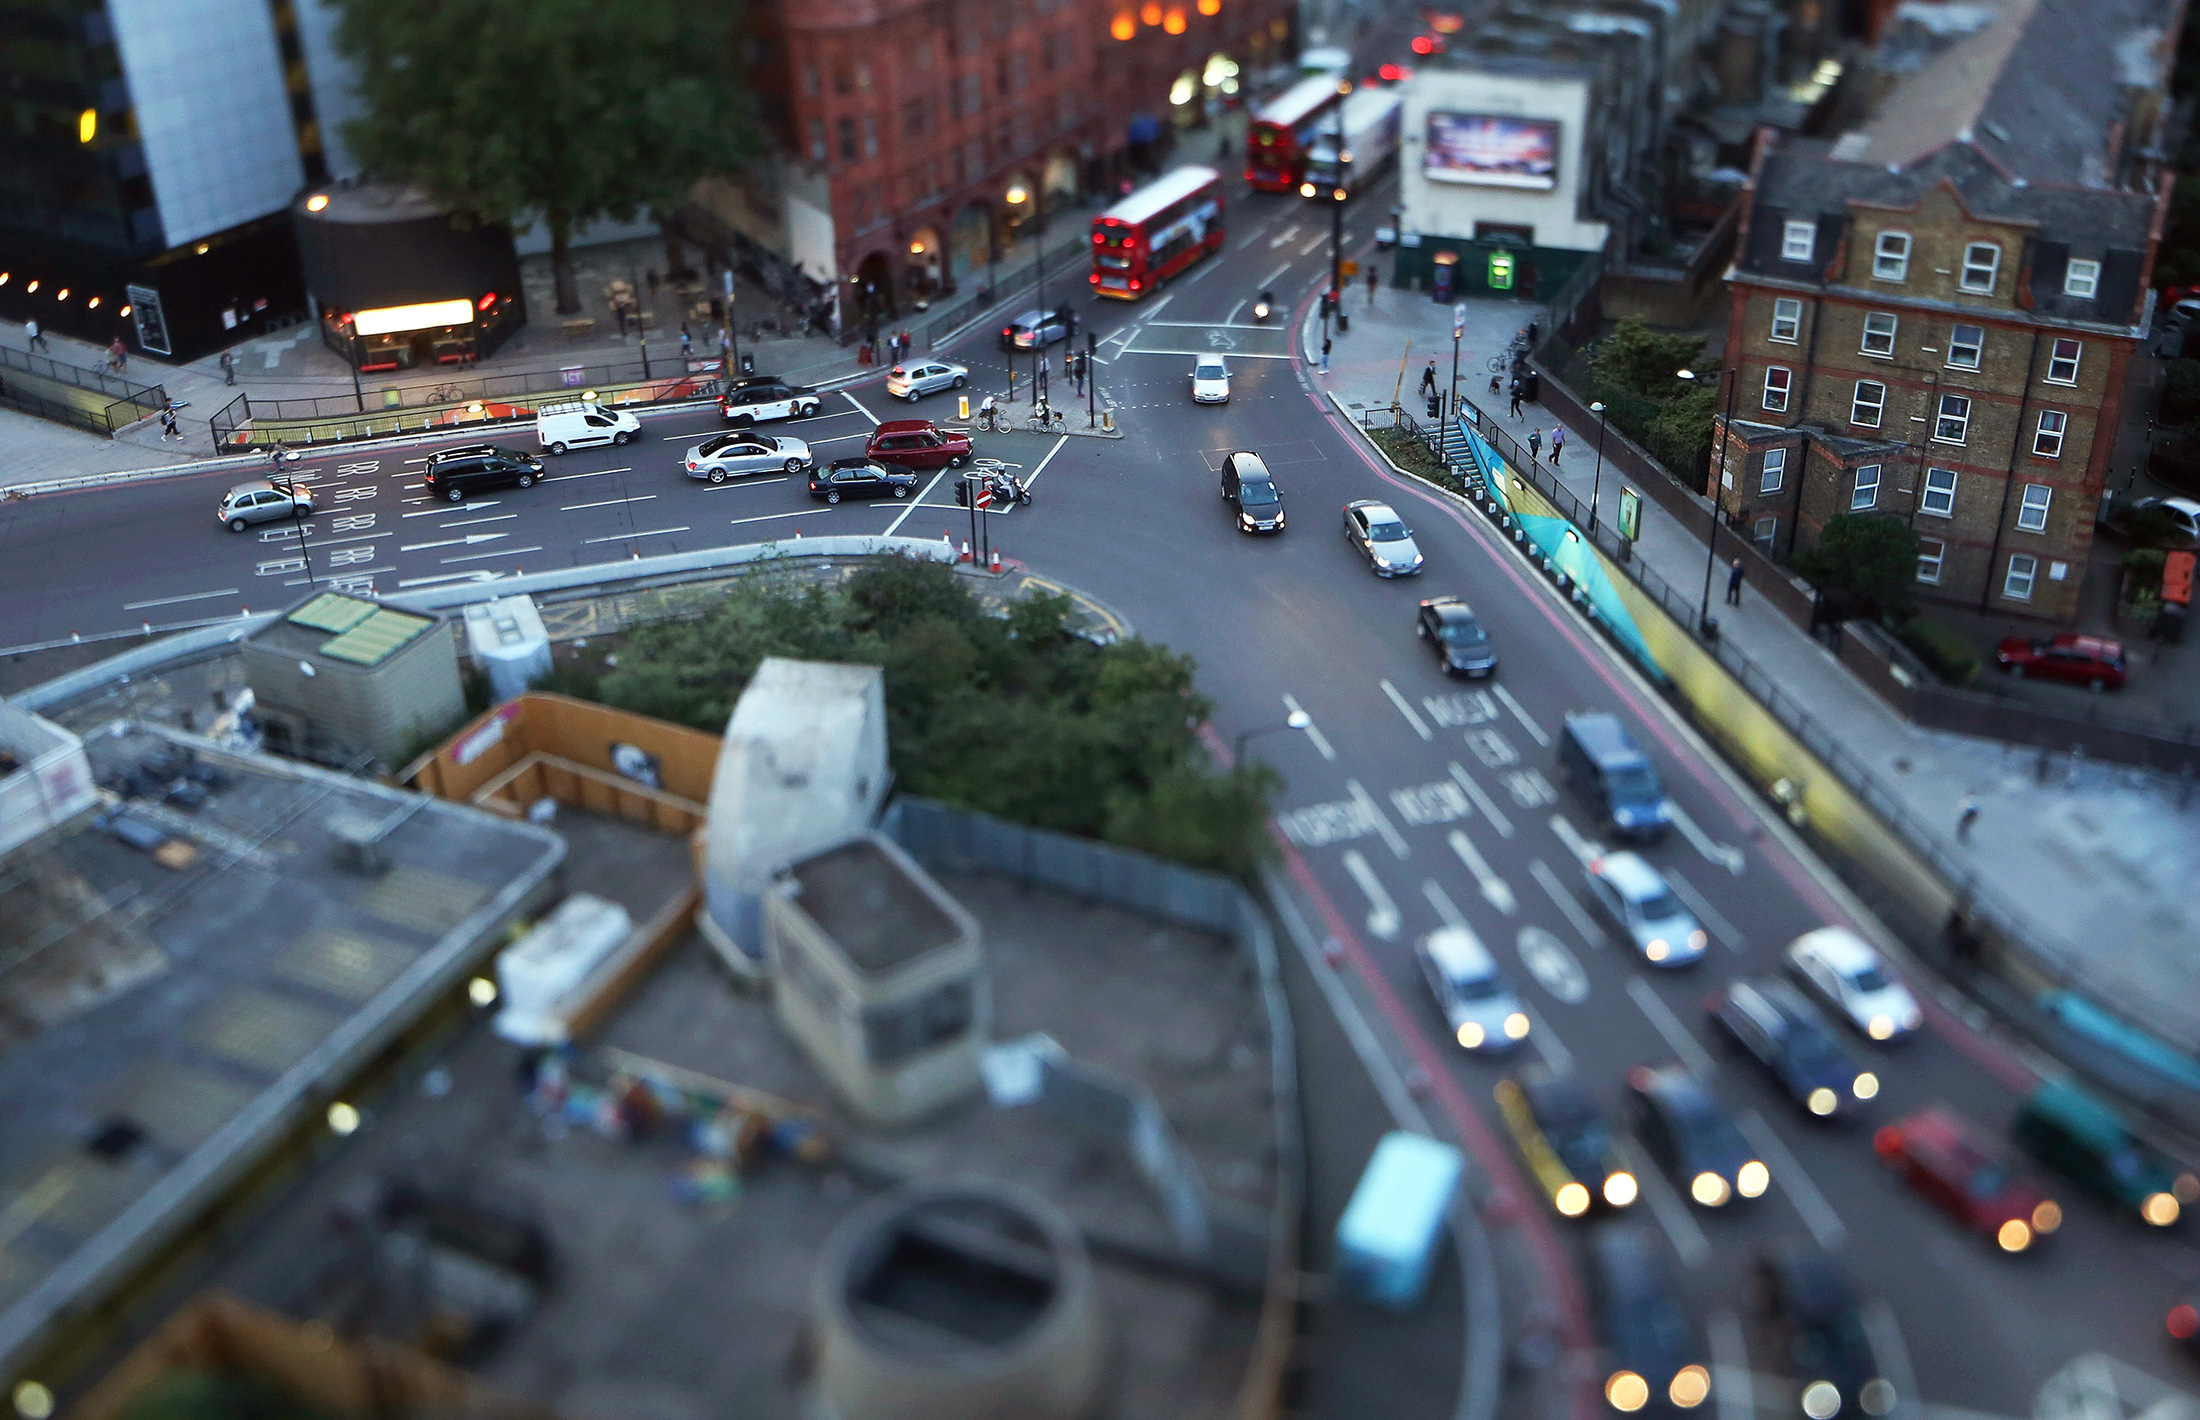 Traffic moves around the Old Street roundabout, also referred to as 'Silicon Roundabout,' in the area known as 'Tech City', in this photograph taken with a tilt-shift lens in London, U.K., on Wednesday, Aug. 20, 2014. Brookfield Asset Management Inc. is close to an agreement for Amazon.com Inc. to rent about 400,000 square feet (37,160 square meters) of office space near the London technology hub known as Silicon Roundabout, a person with knowledge of the talks said last month.
